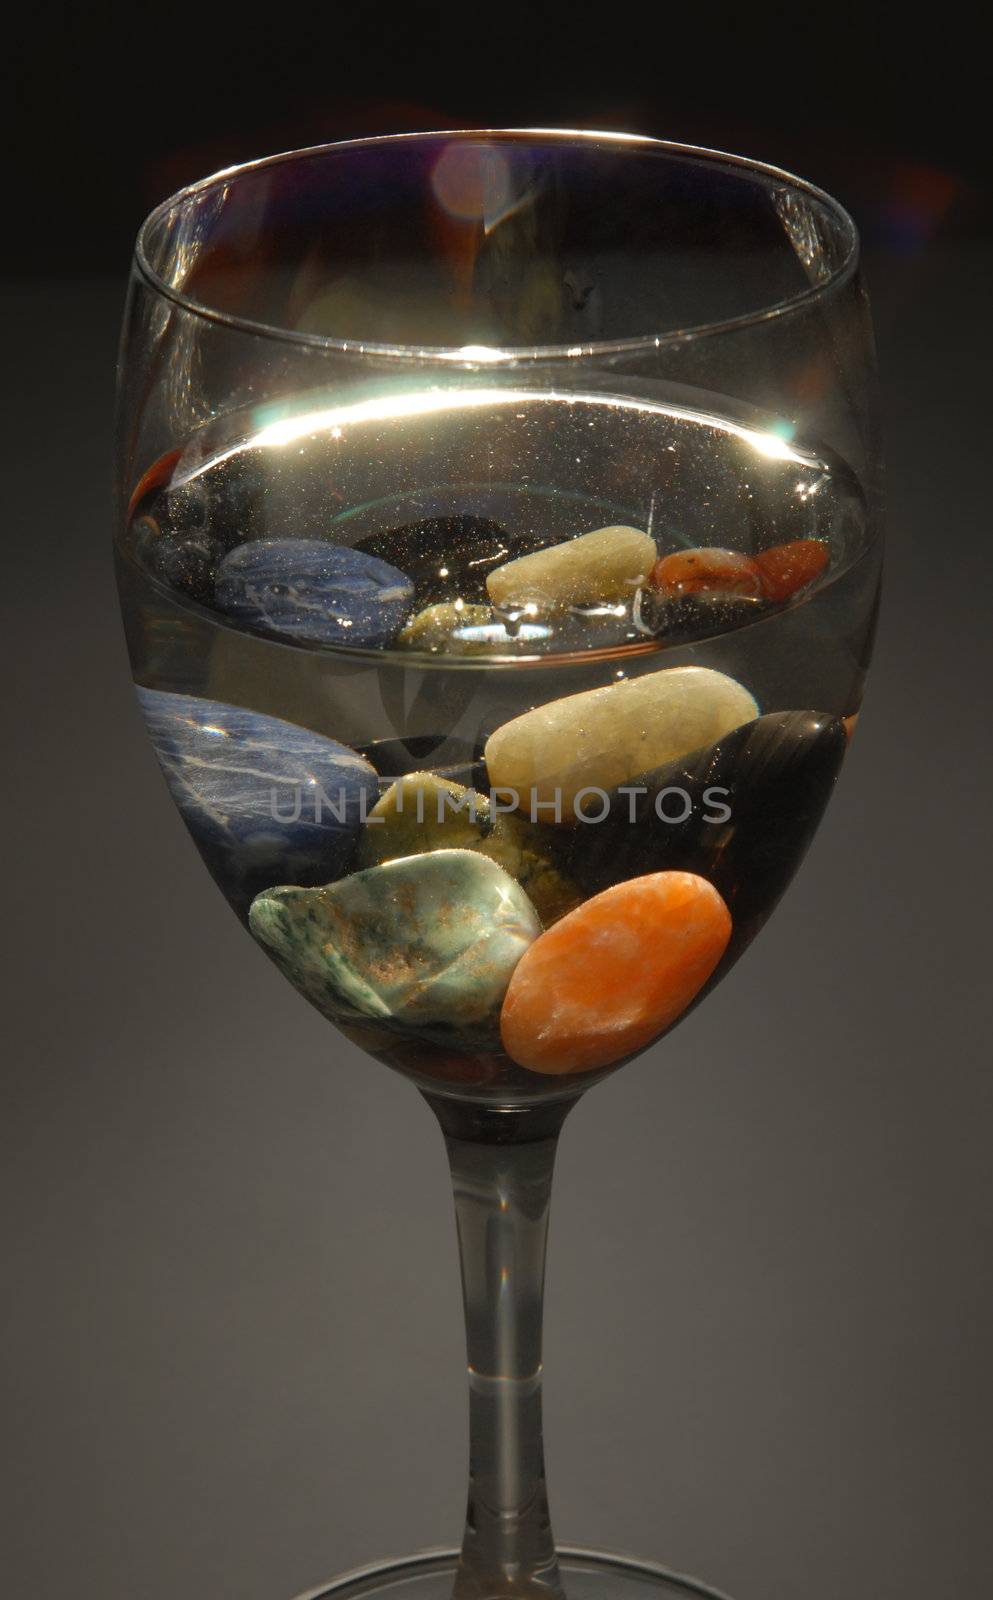 Colored stones in a glass of water by cienpies